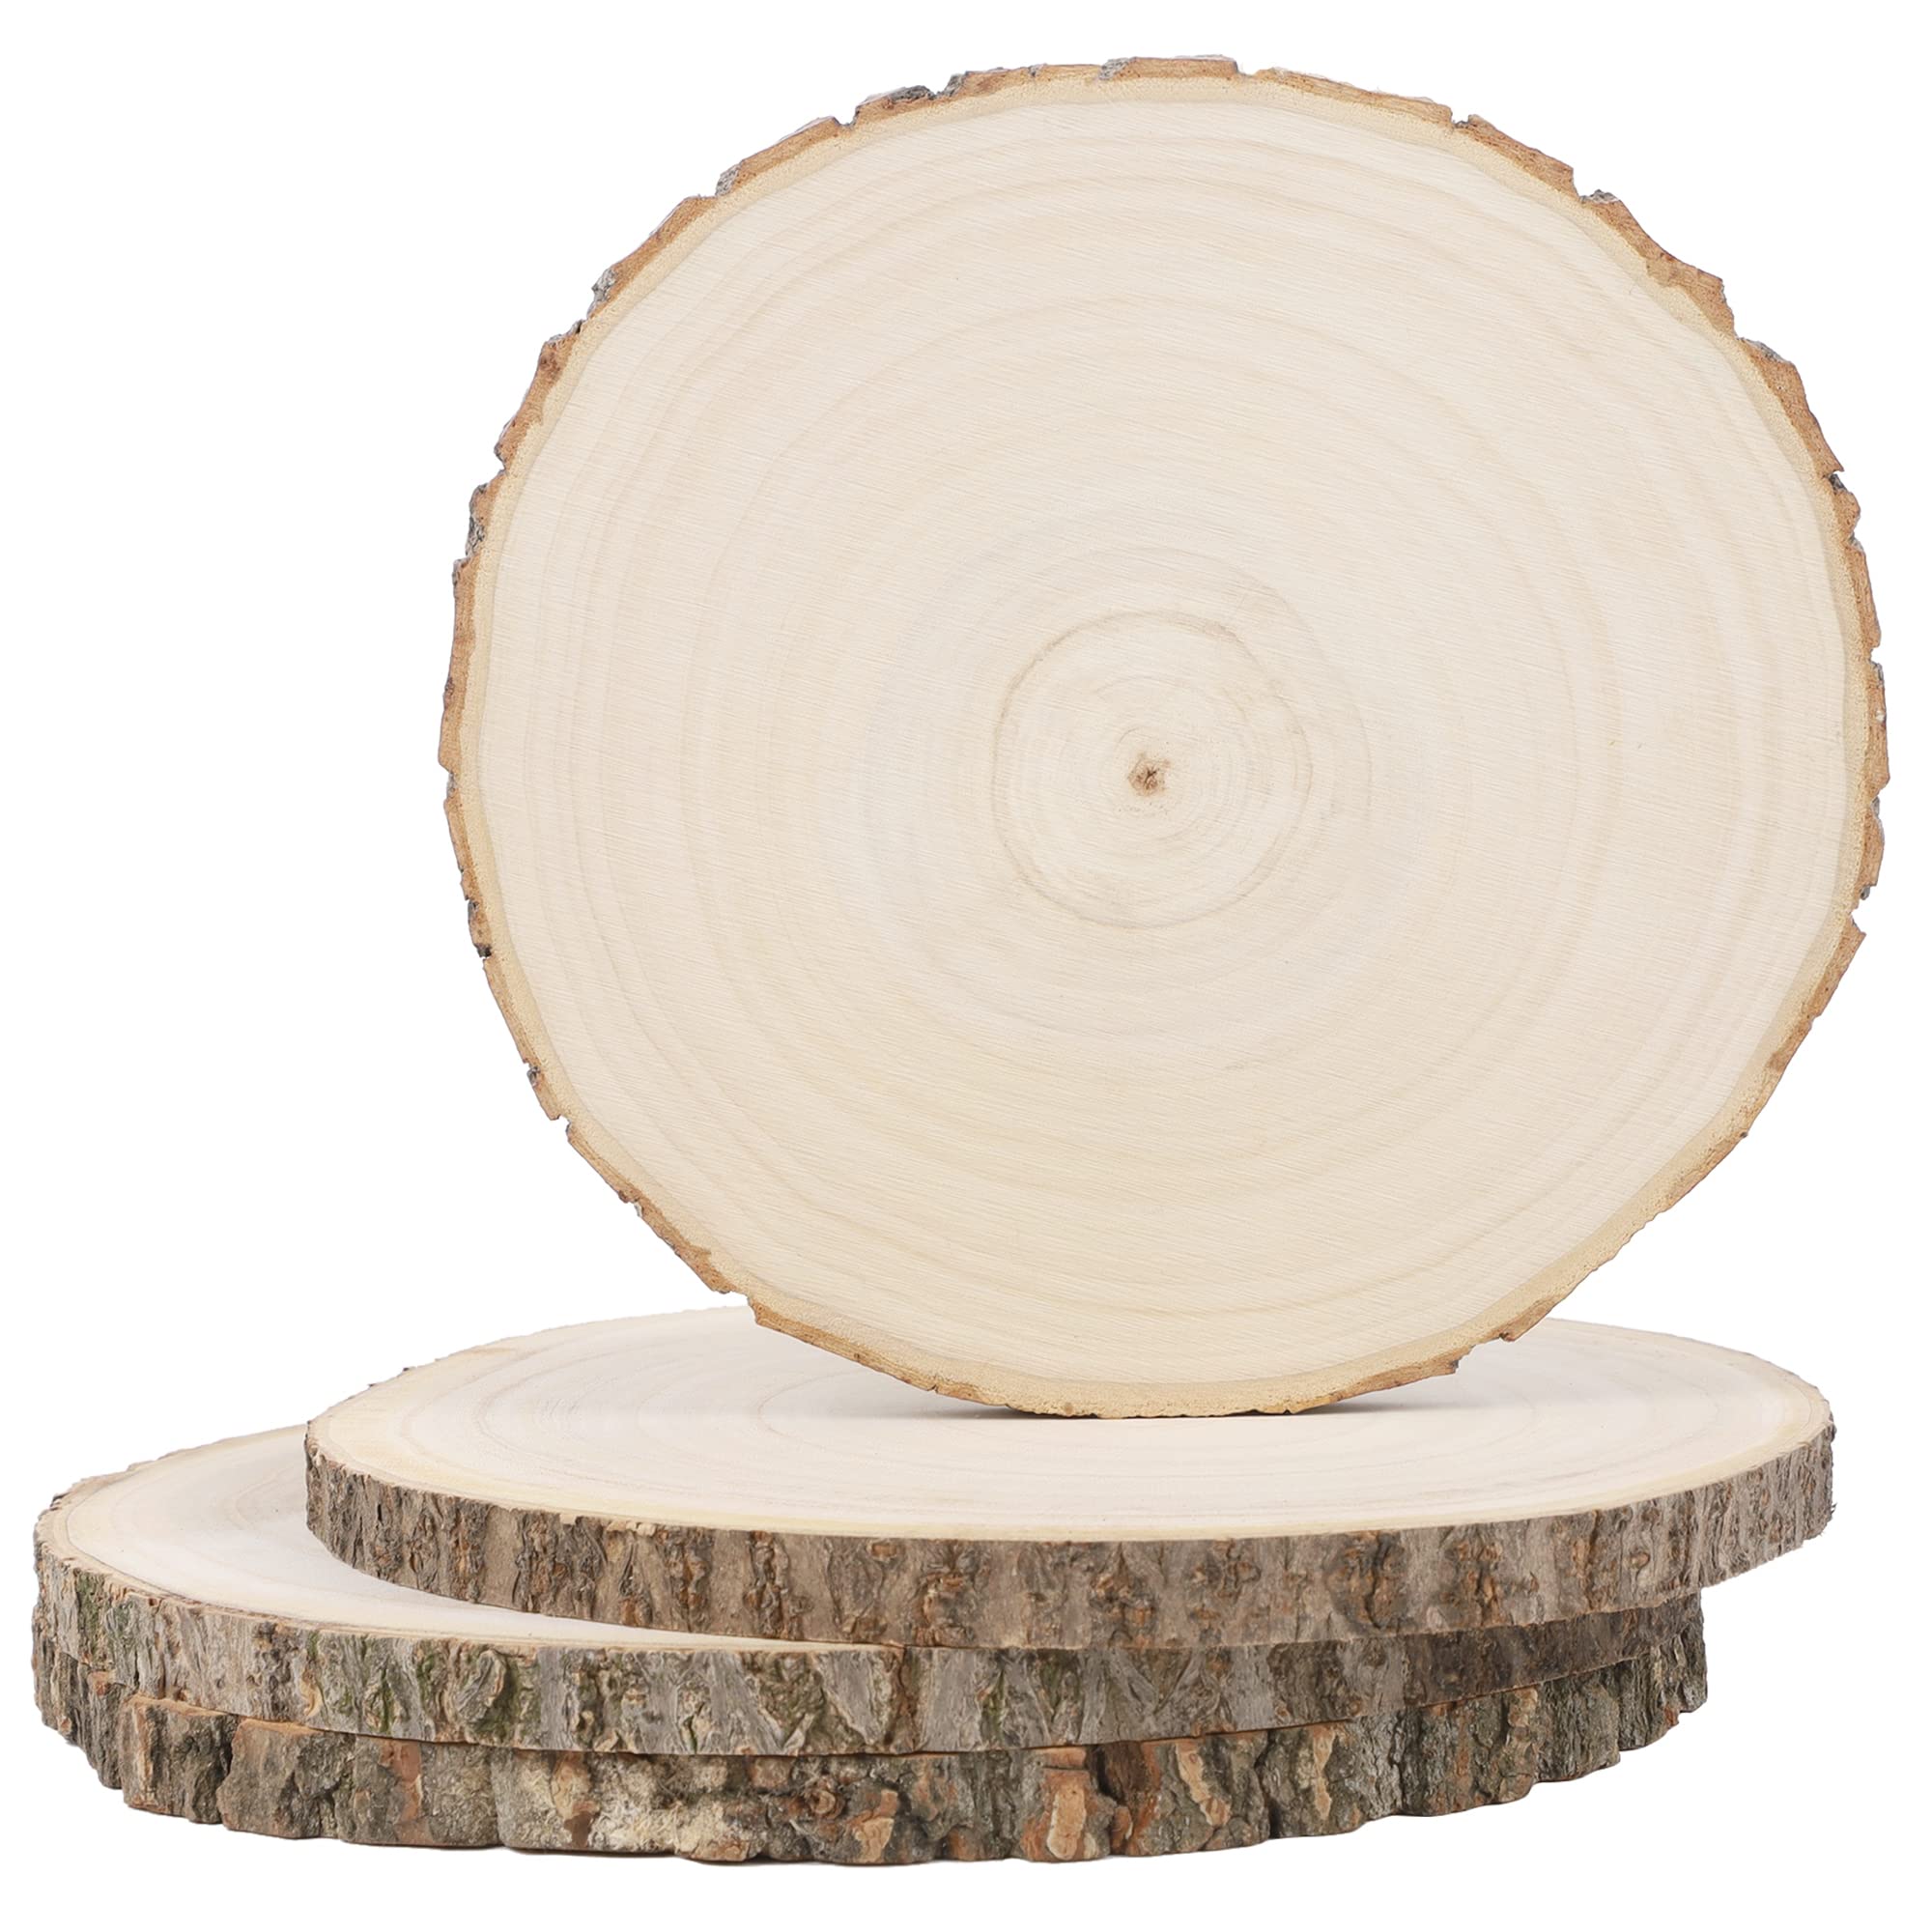 Unfinished Wood Slices Large Wood Slices for Crafts Wood Centerpieces for Tables  Wood Slabs 7 - 8.5